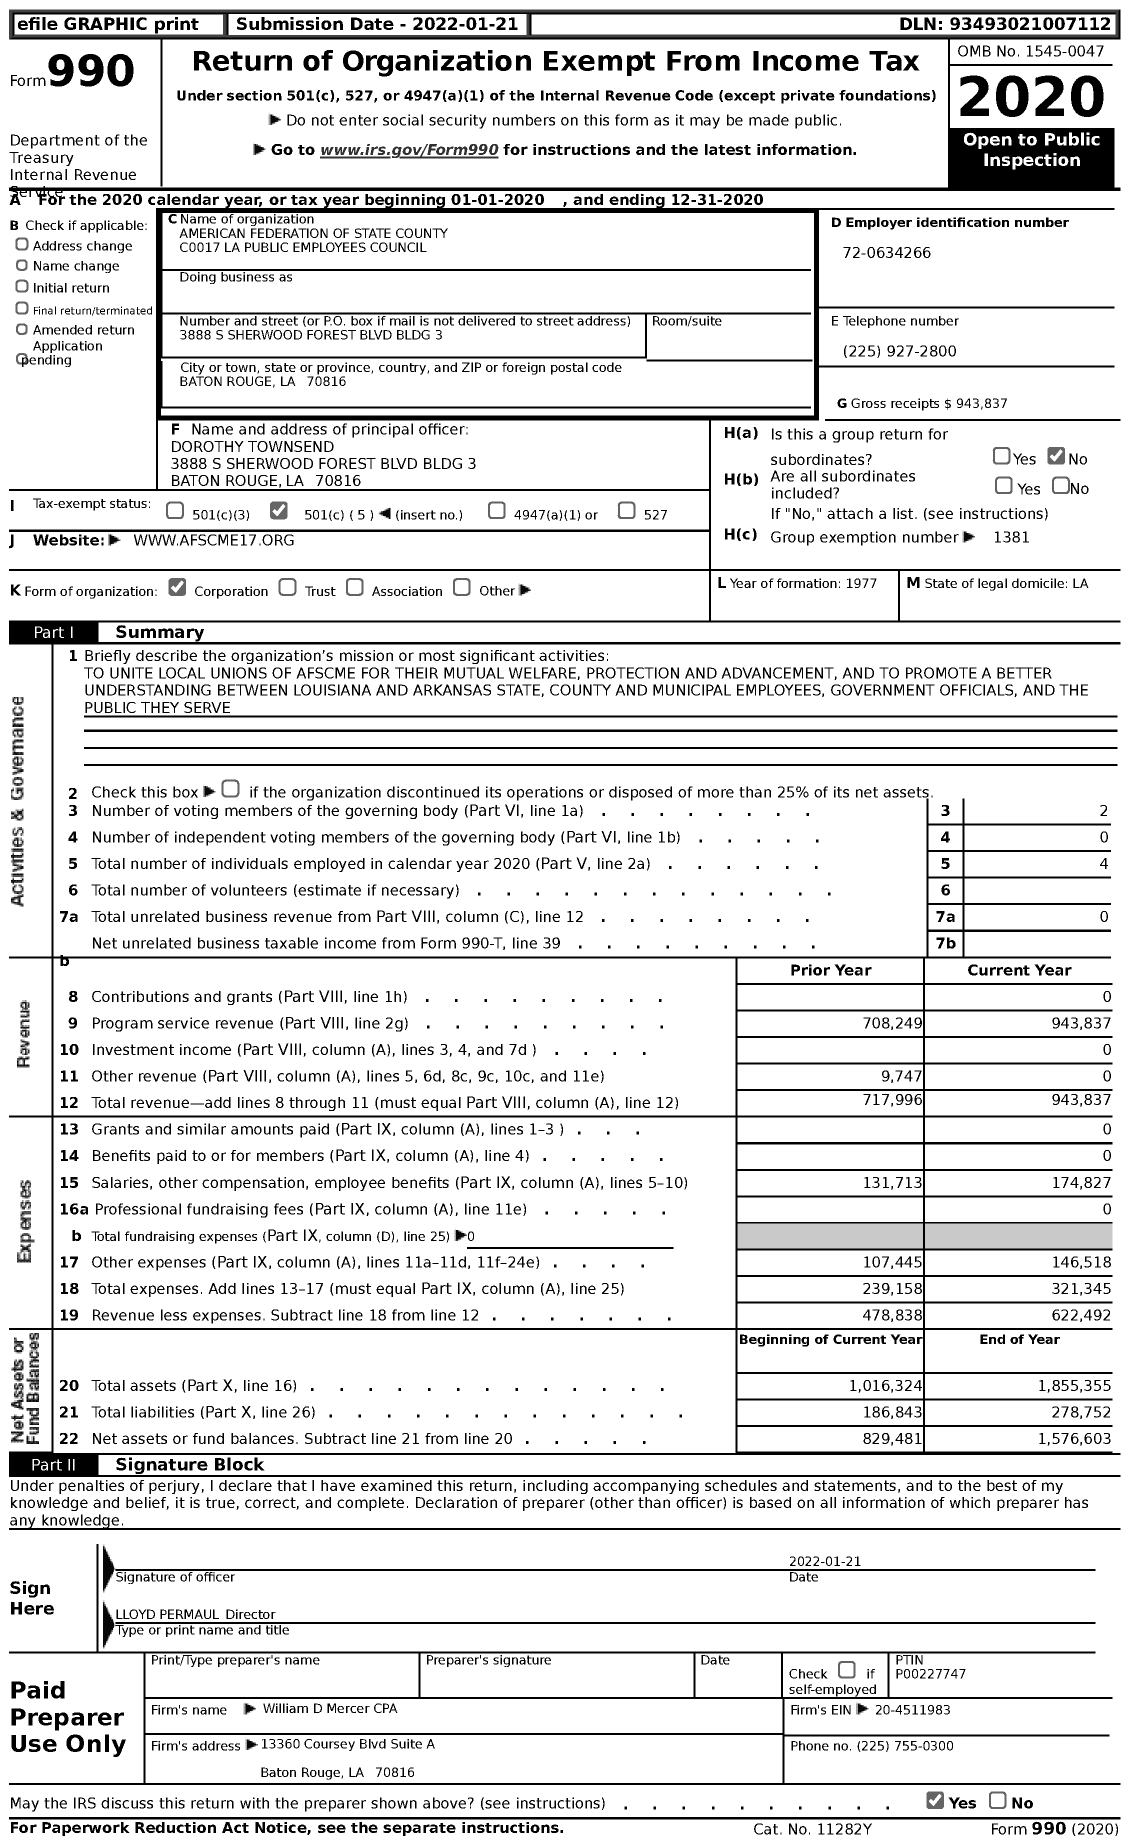 Image of first page of 2020 Form 990 for American Federation of State County & Municipal Employees - C0017la La Public Employees Council